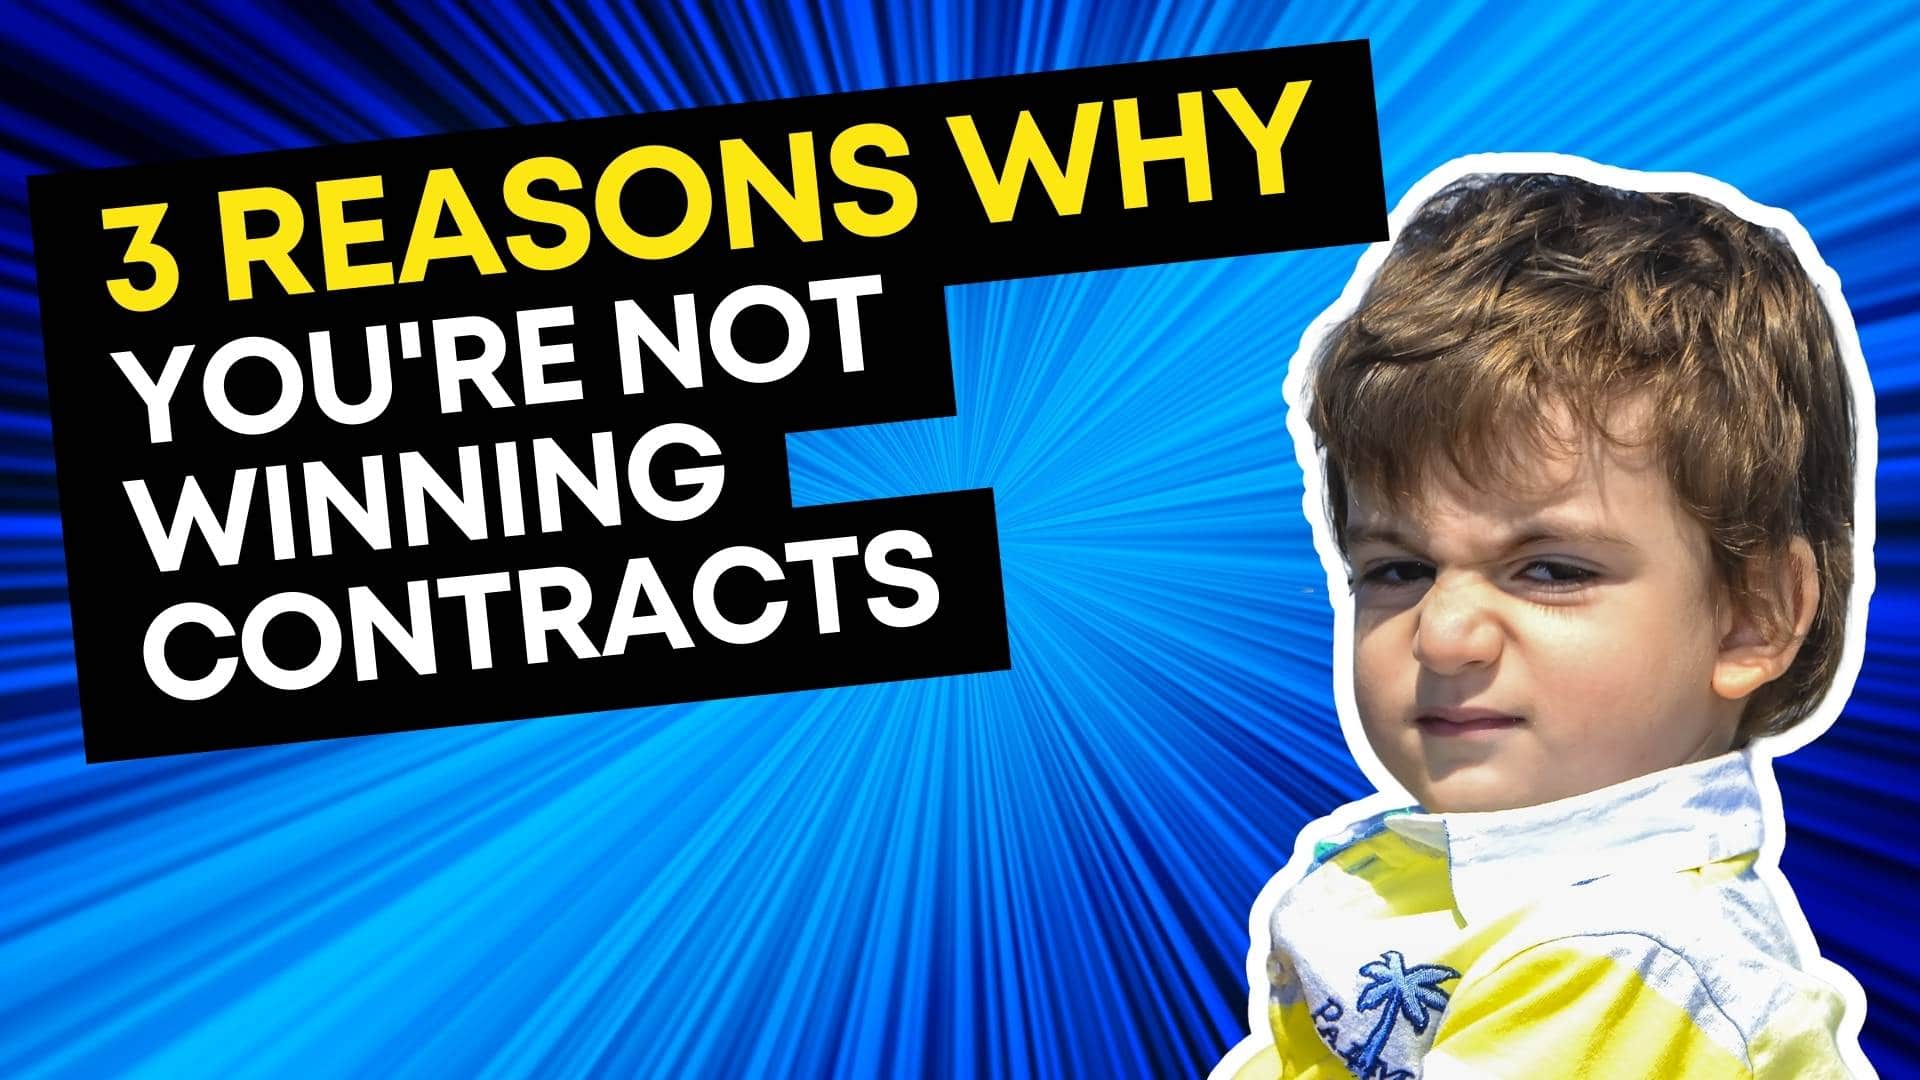 3 Reasons Why You're Not Winning Contracts